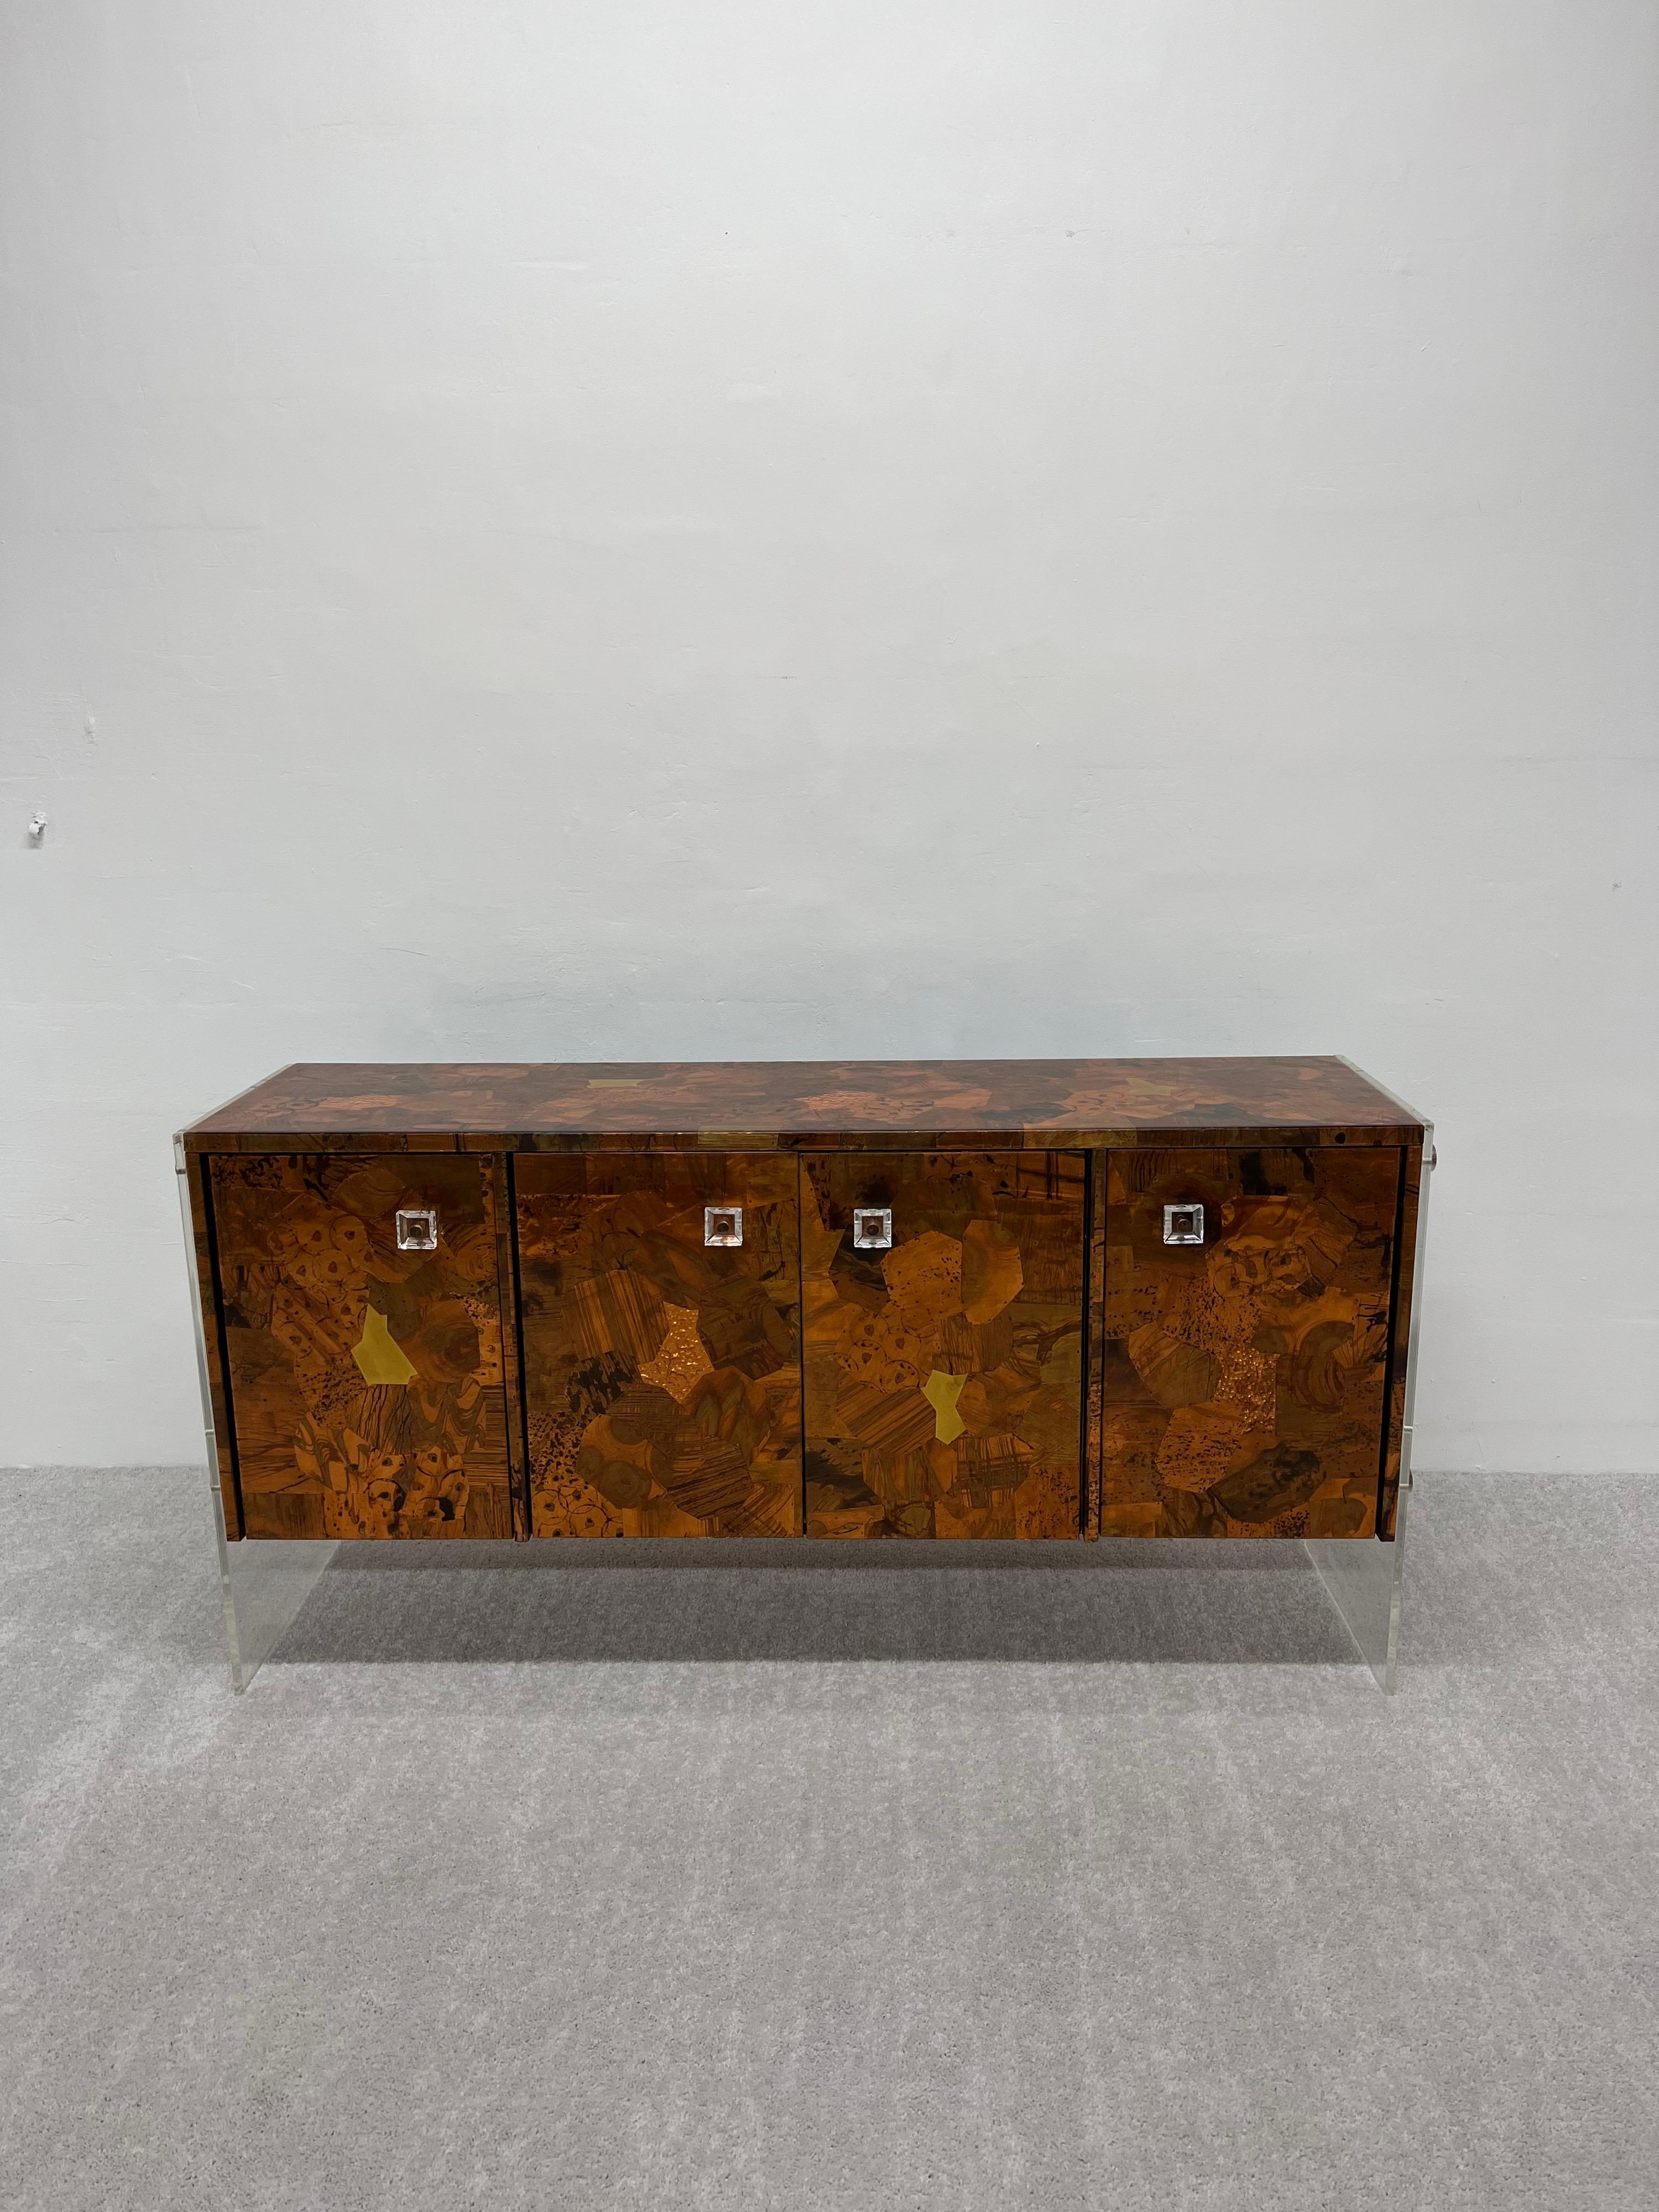 Floating sideboard made of hammered copper over wood with a hard resin coating and suspended from two pieces of lucite on each end. This modern statement piece shares similar qualities to Paul Evans and Milo Baughman era furniture designs. The door